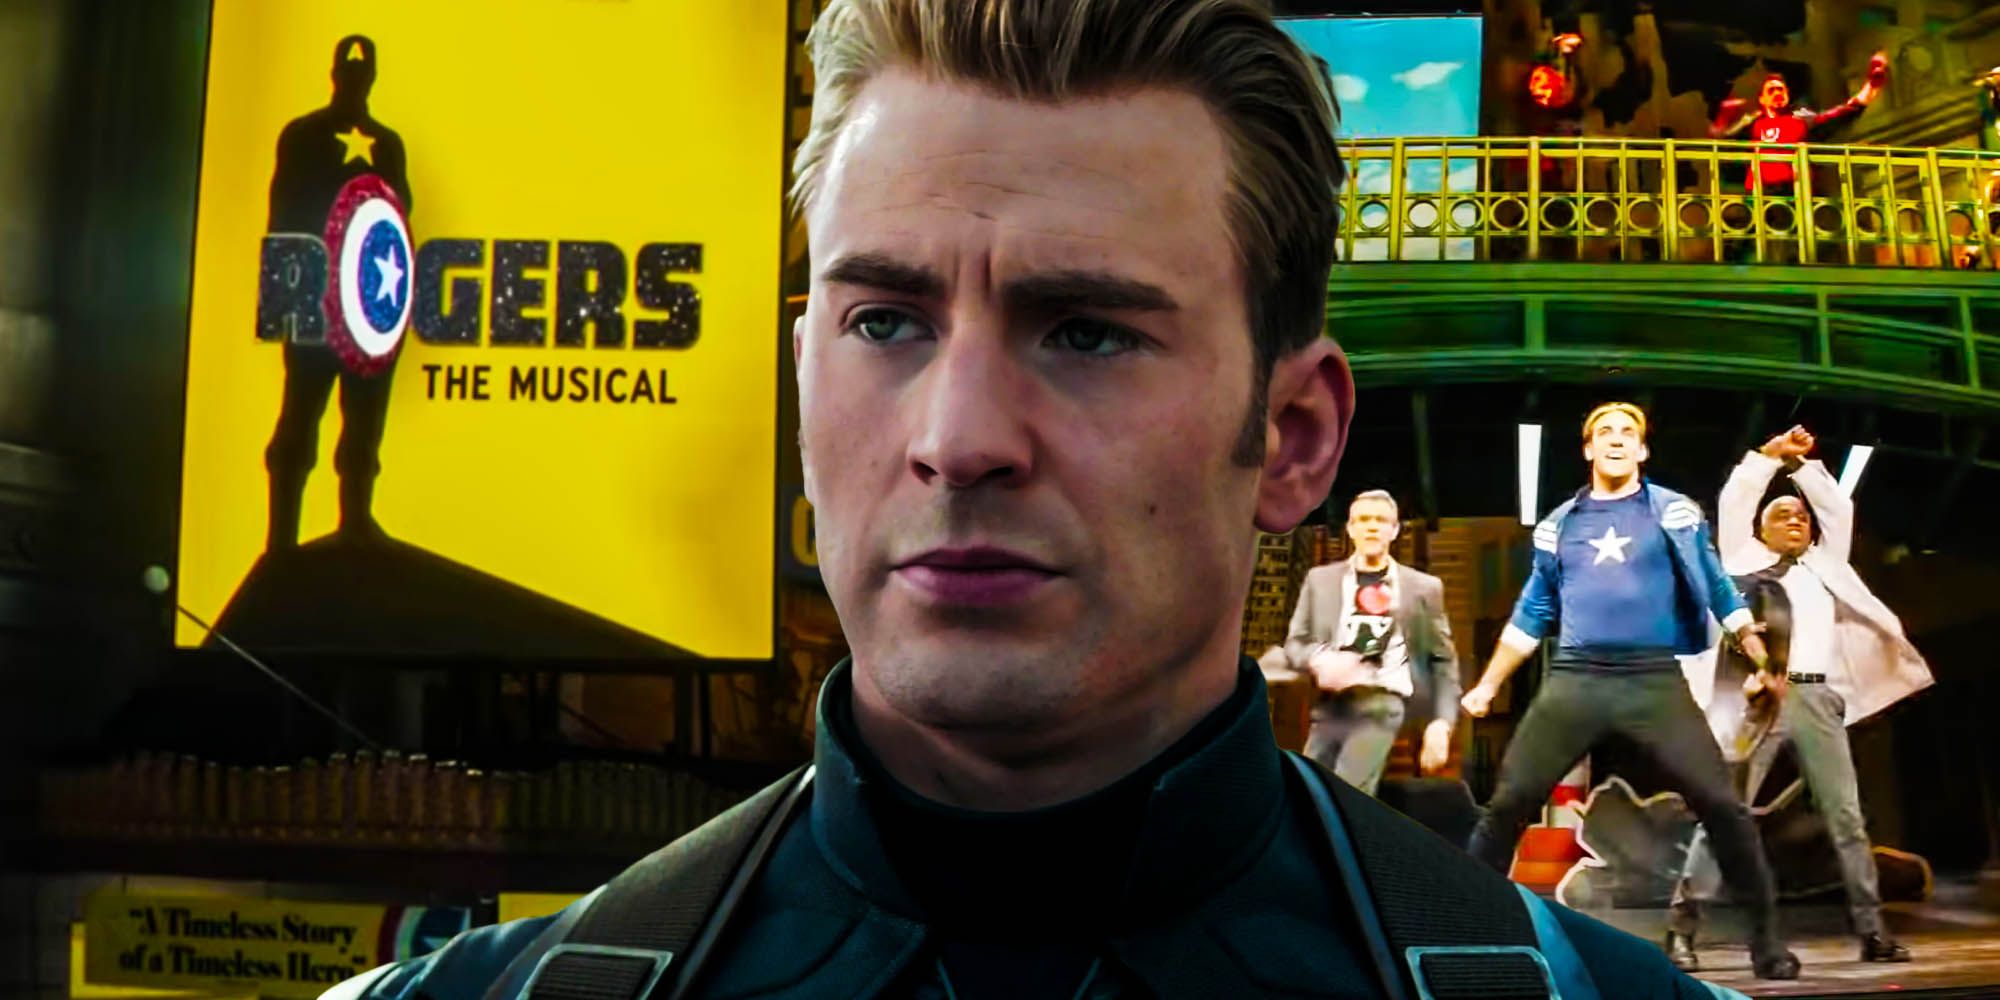 Rogers the musical has a ending problem Hawkeye